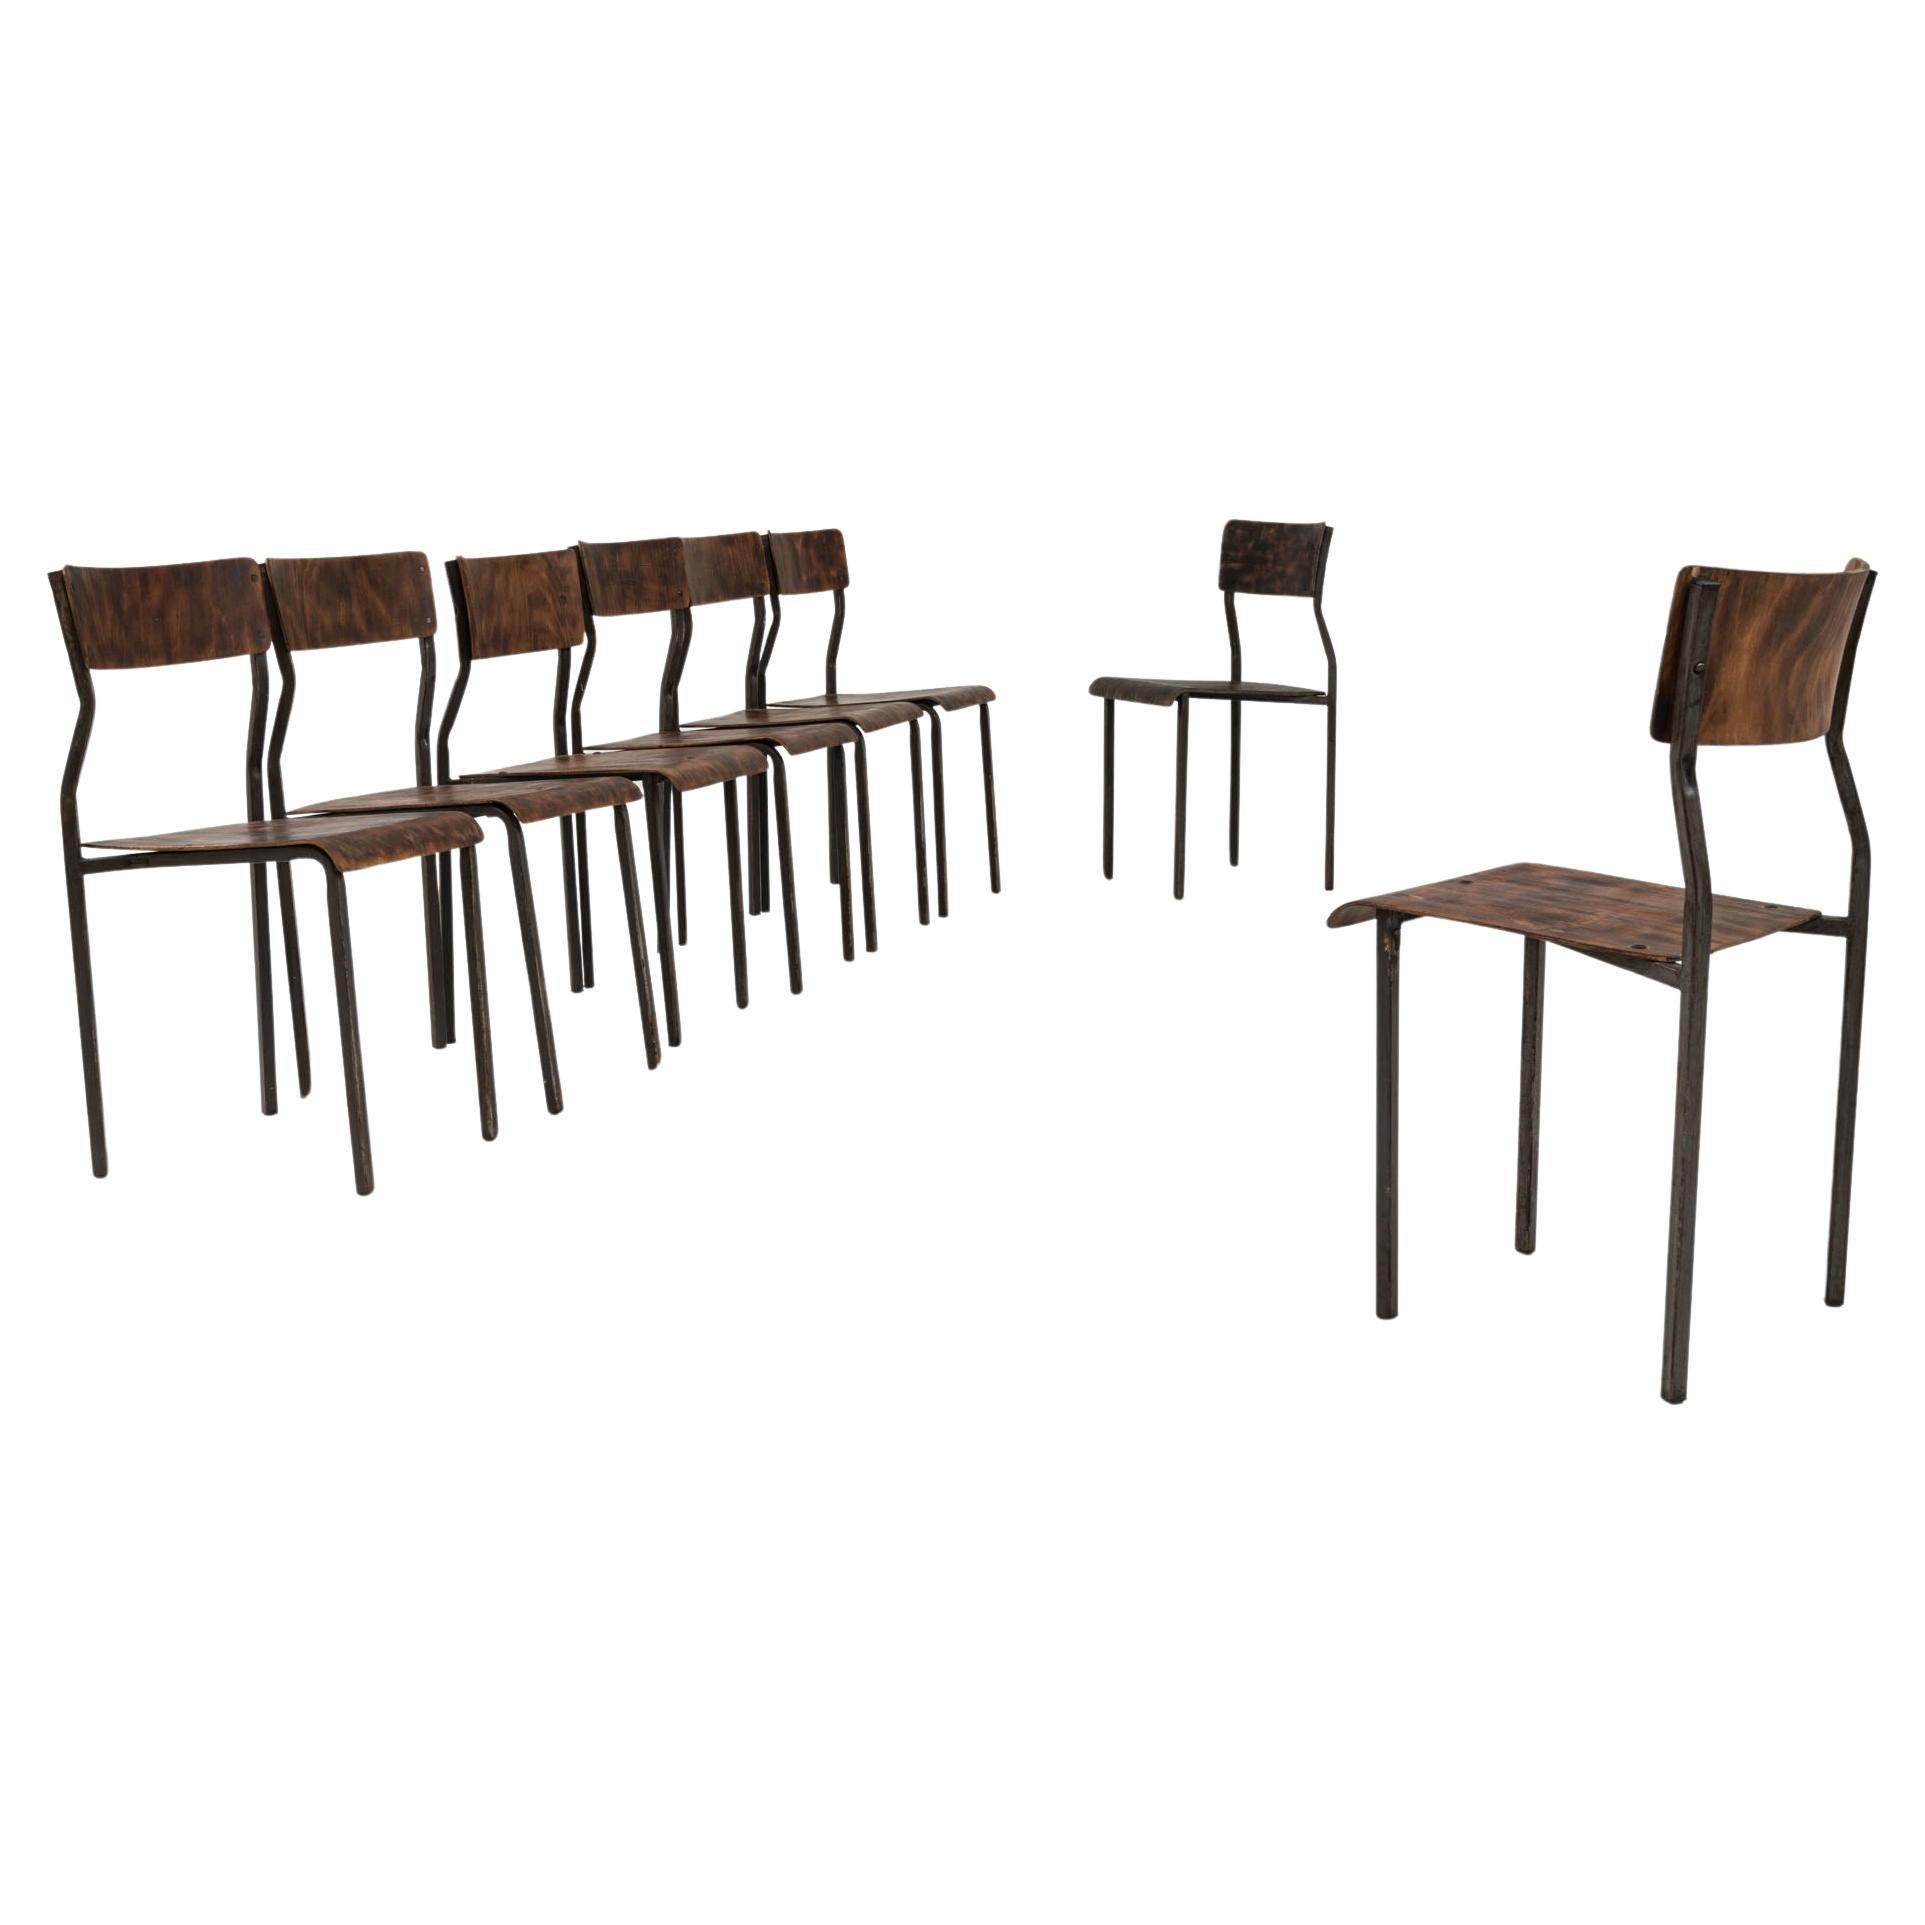 20th Century Central European Metal & Wooden Dining Chairs, Set of 4 For Sale